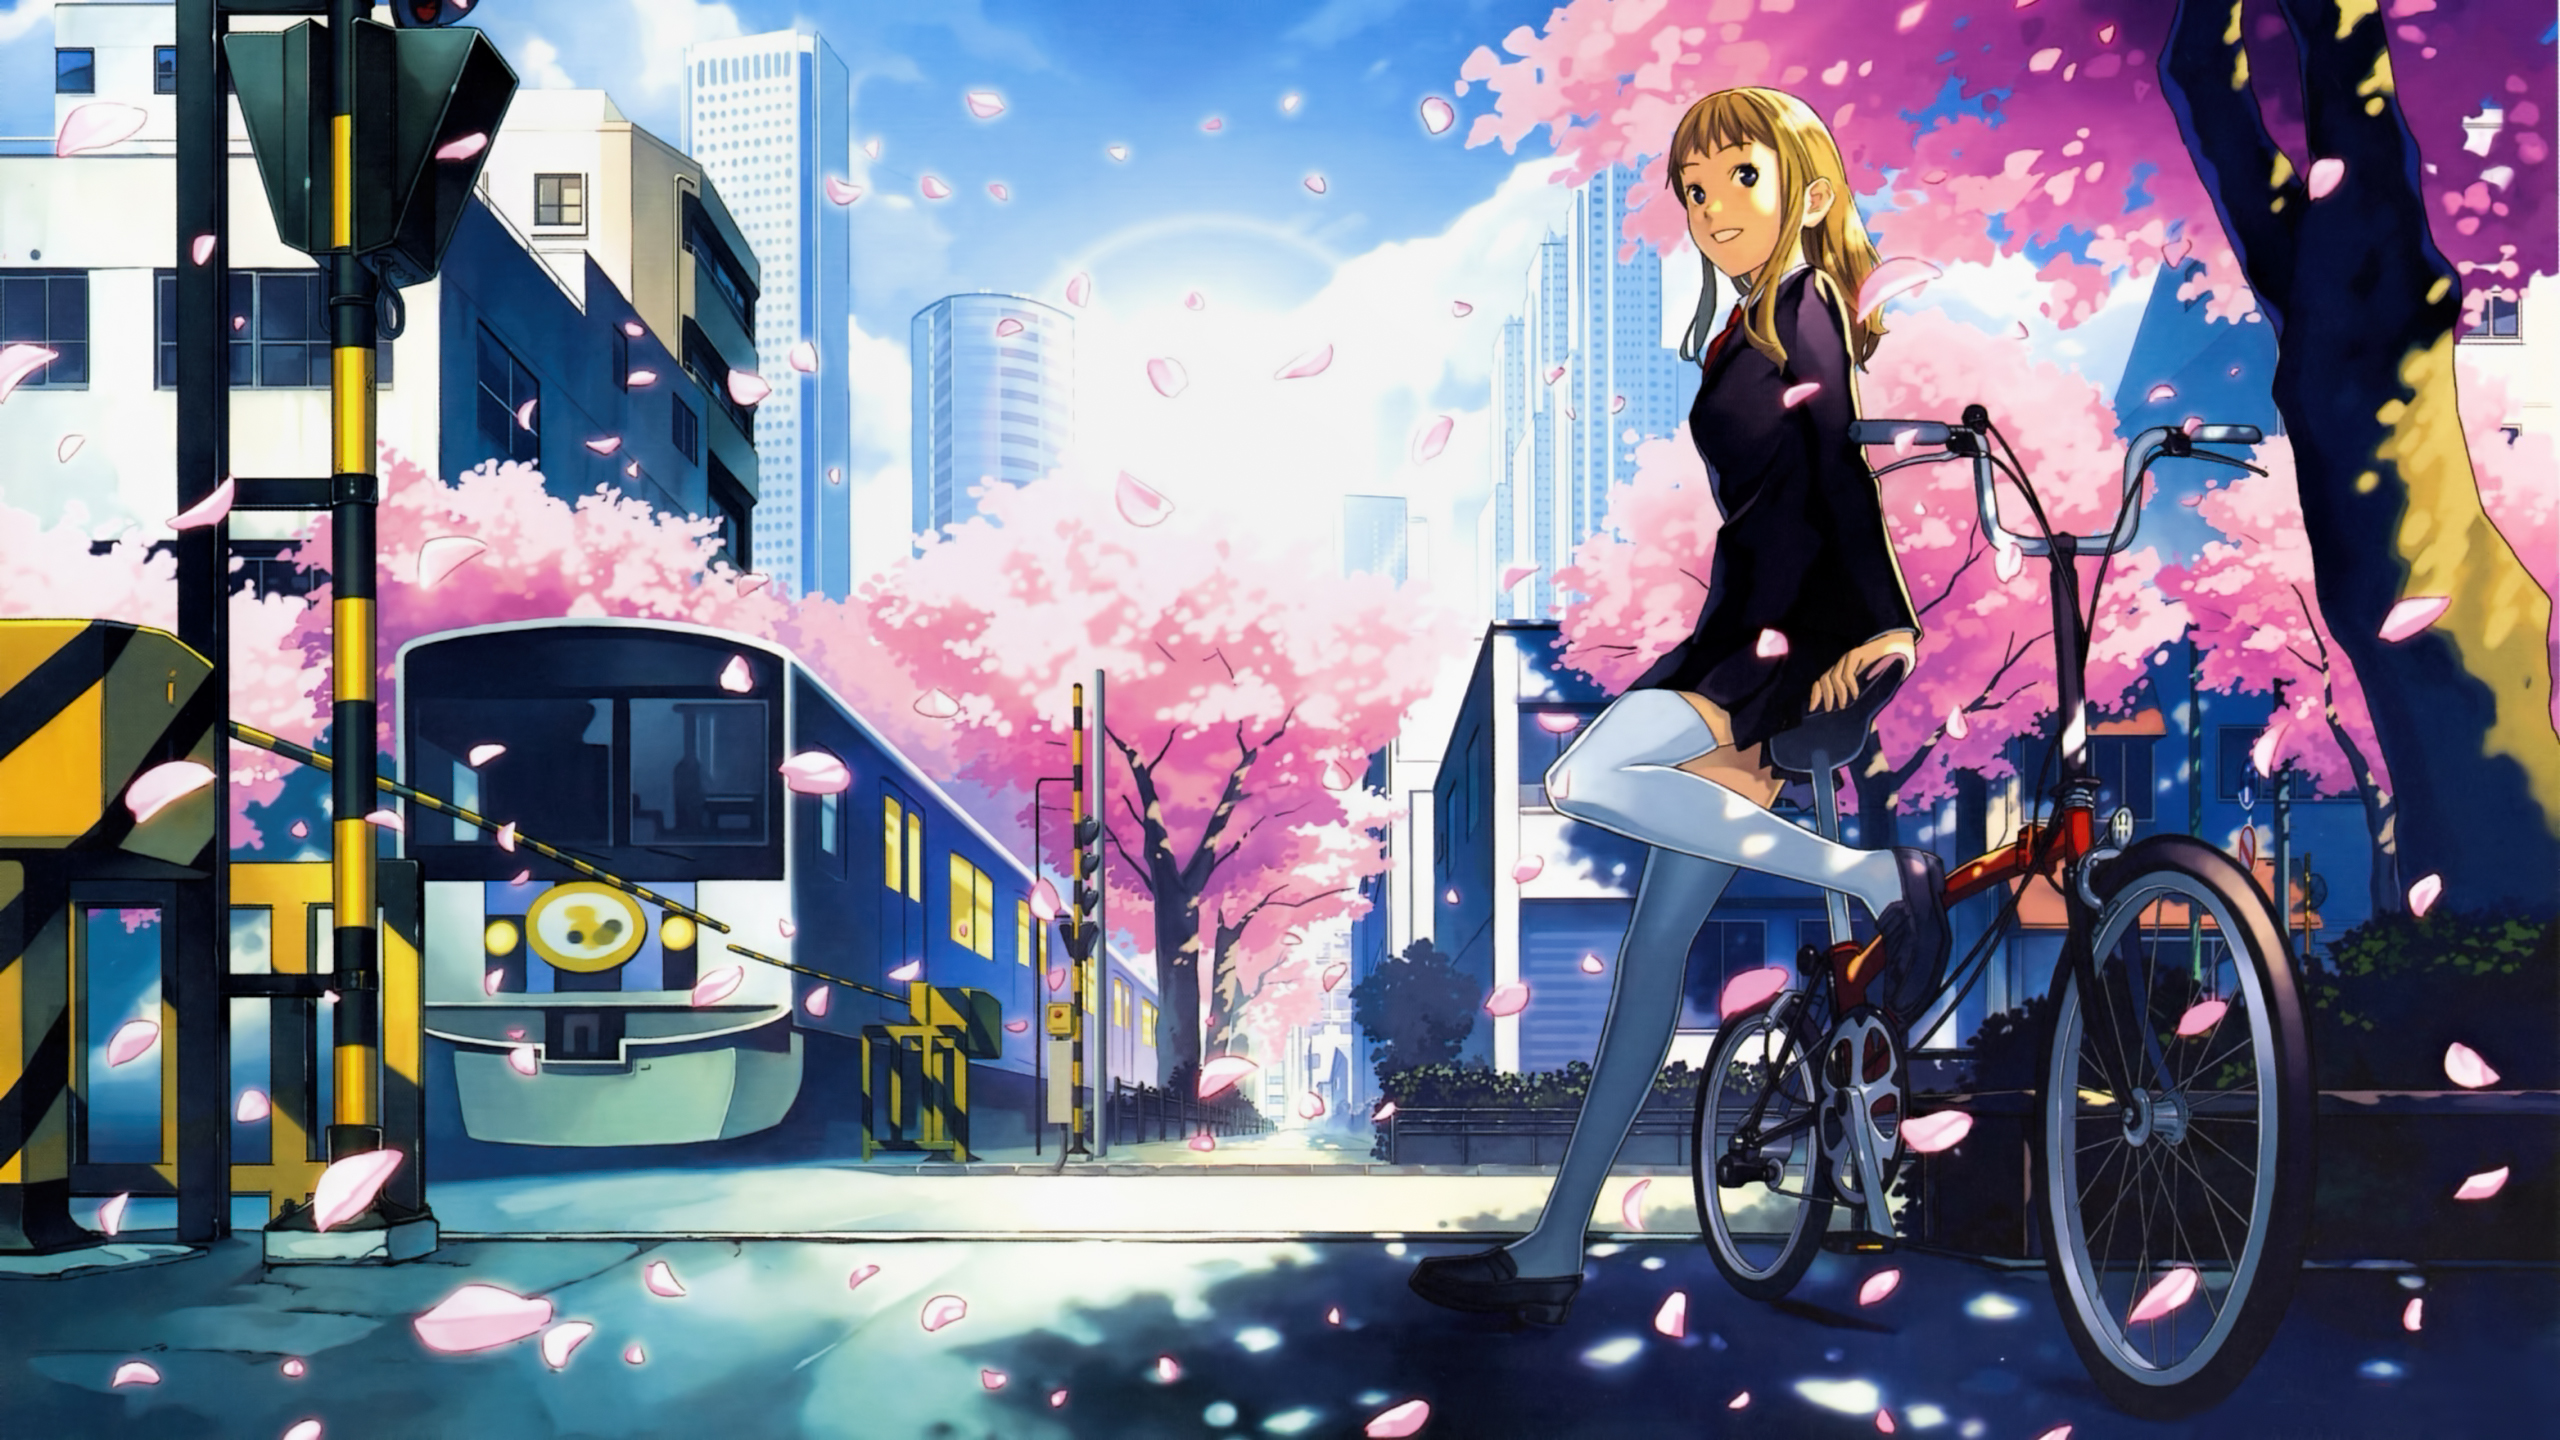 Anime School Girl on the Bike in the City widescreen